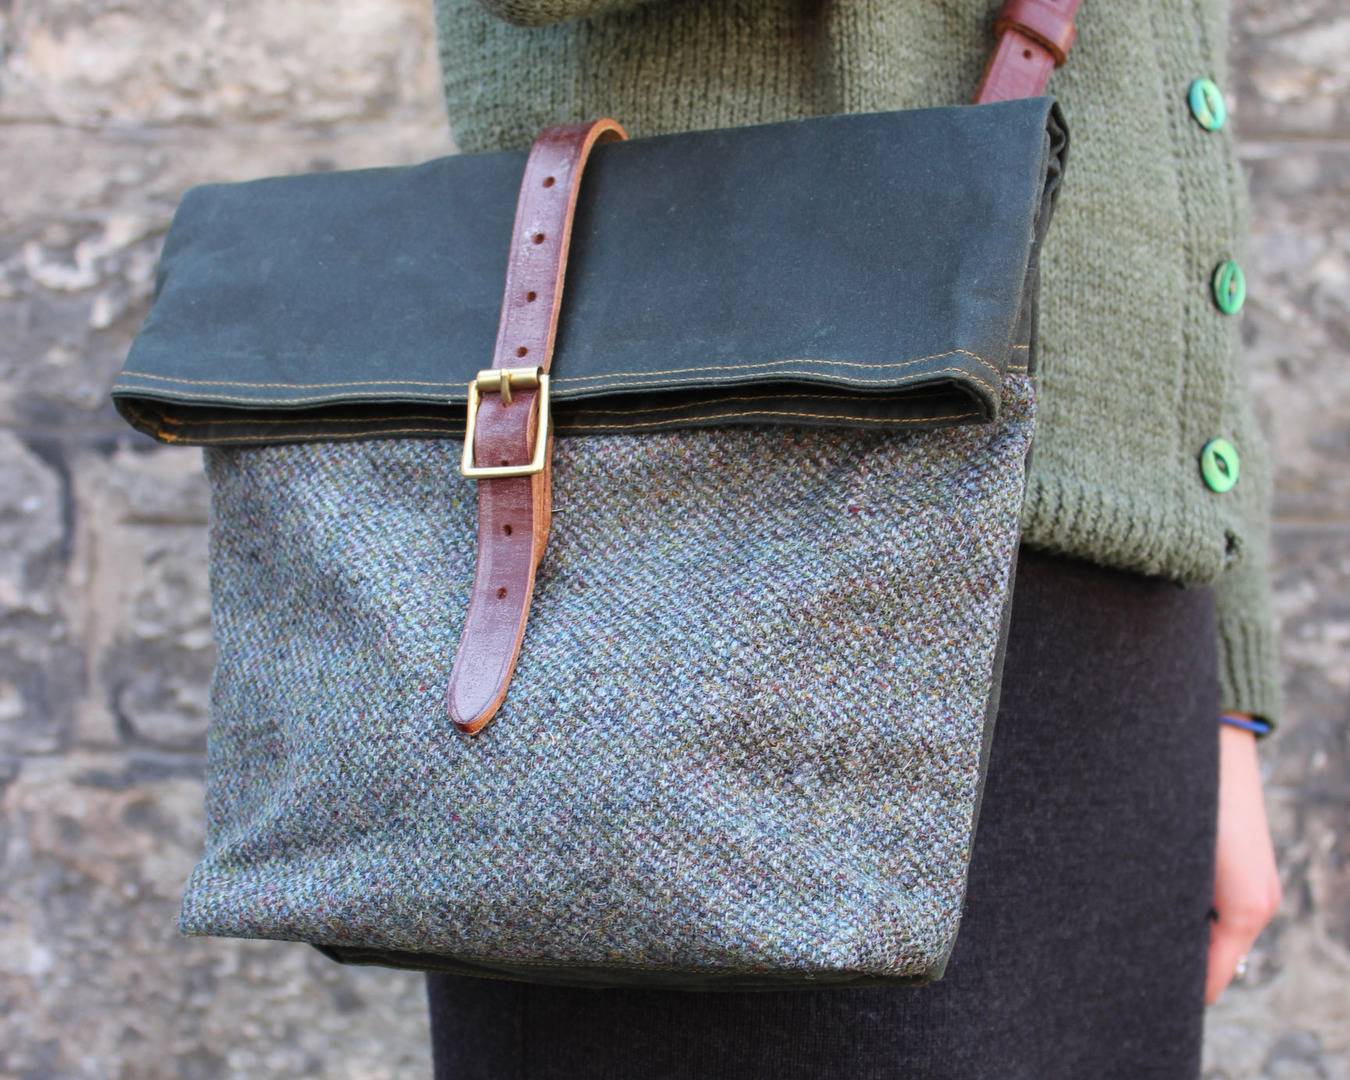 Waxed cotton and Harris Tweed cross-body bag, made exclusively for Scottish Textiles Showcase,© Scottish Textiles Showcase